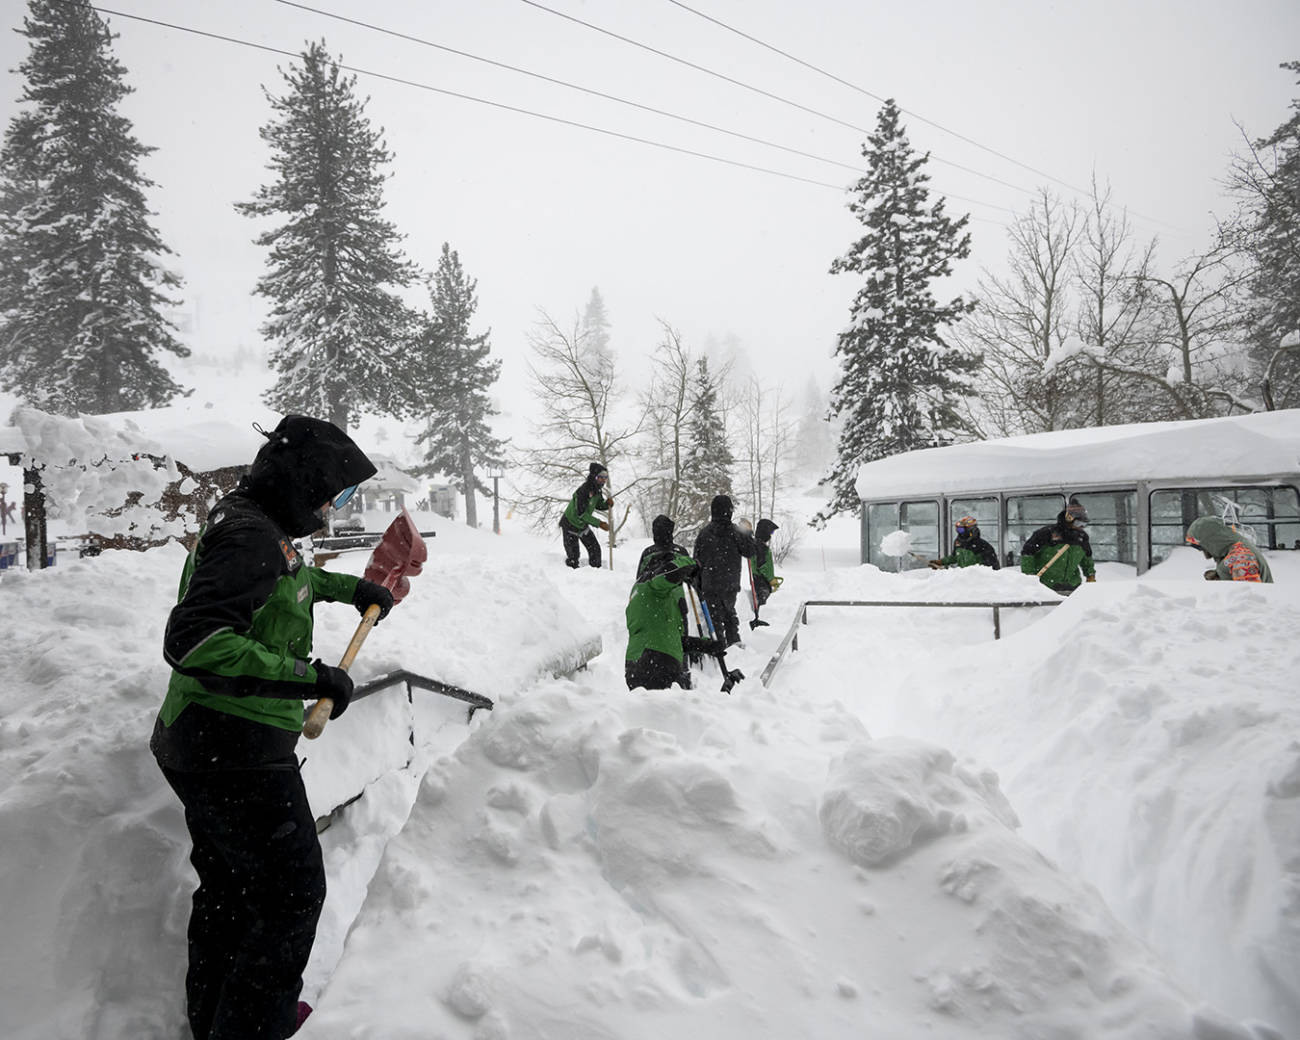 Palisades Tahoe employees digging out during a blizzard